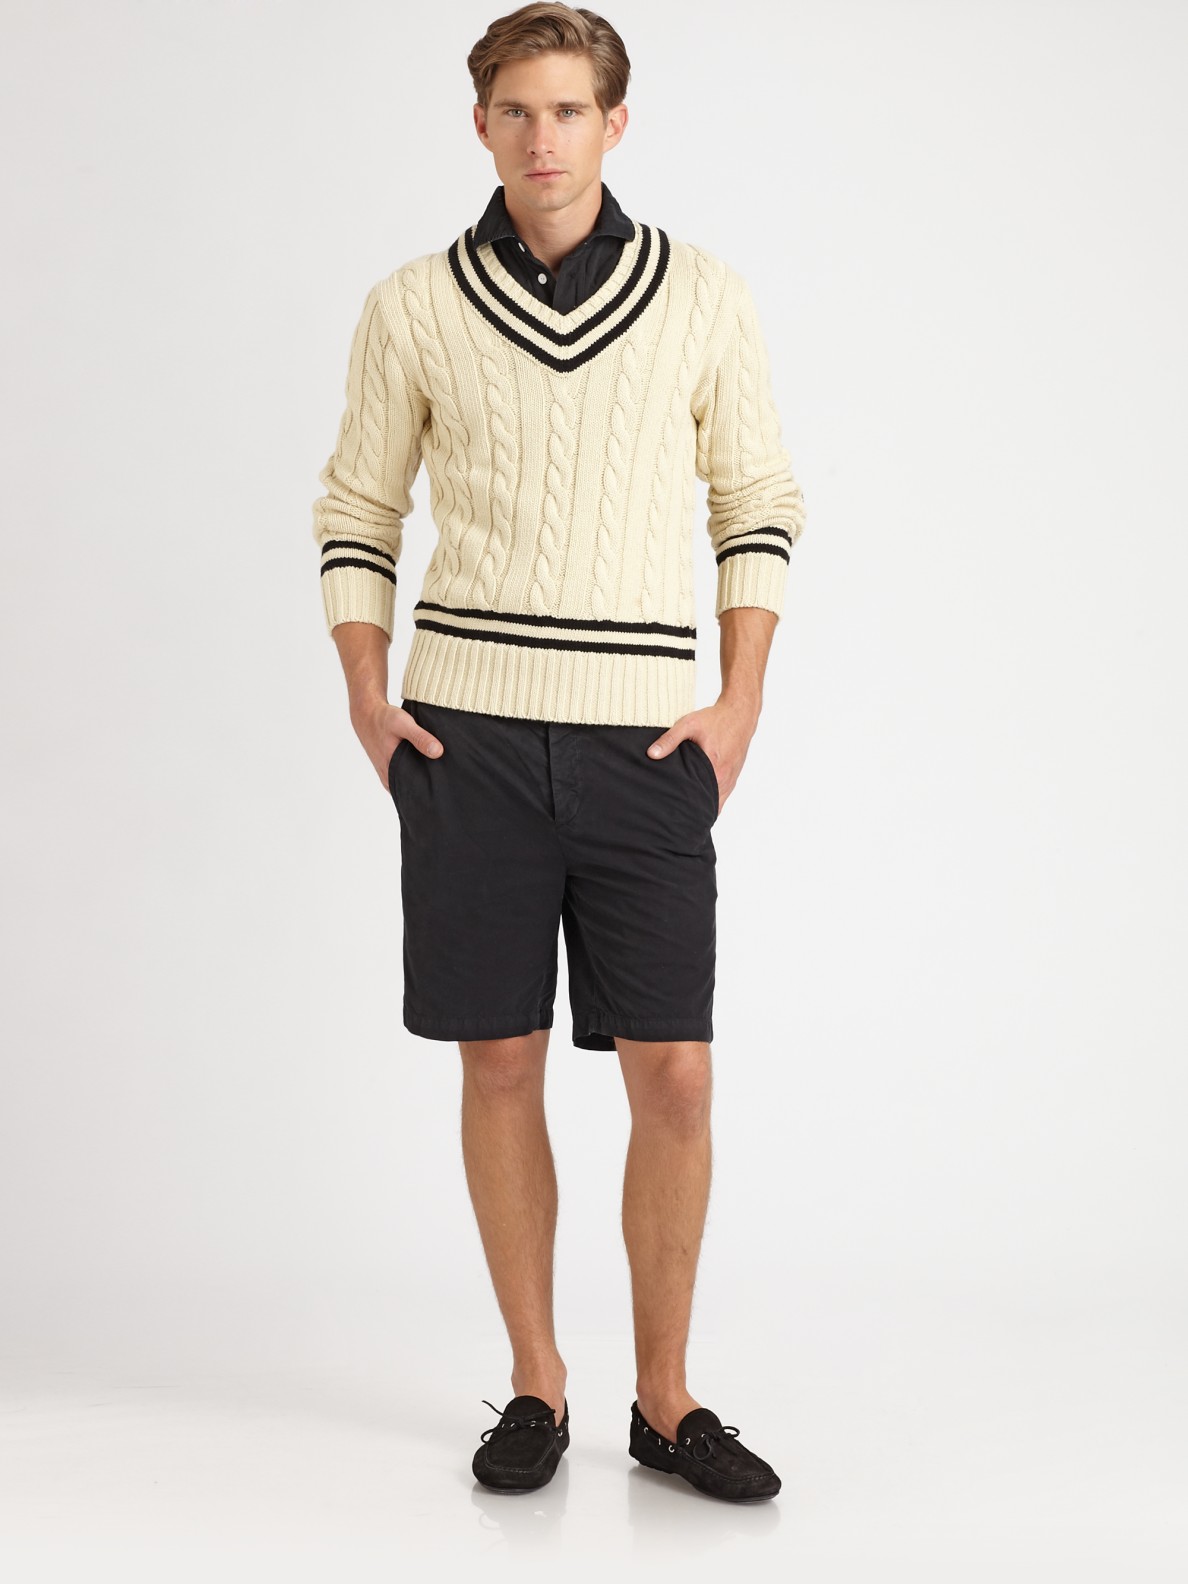 Polo Ralph Lauren Cabled V-neck Cricket Sweater in Cream (Natural) for Men  - Lyst